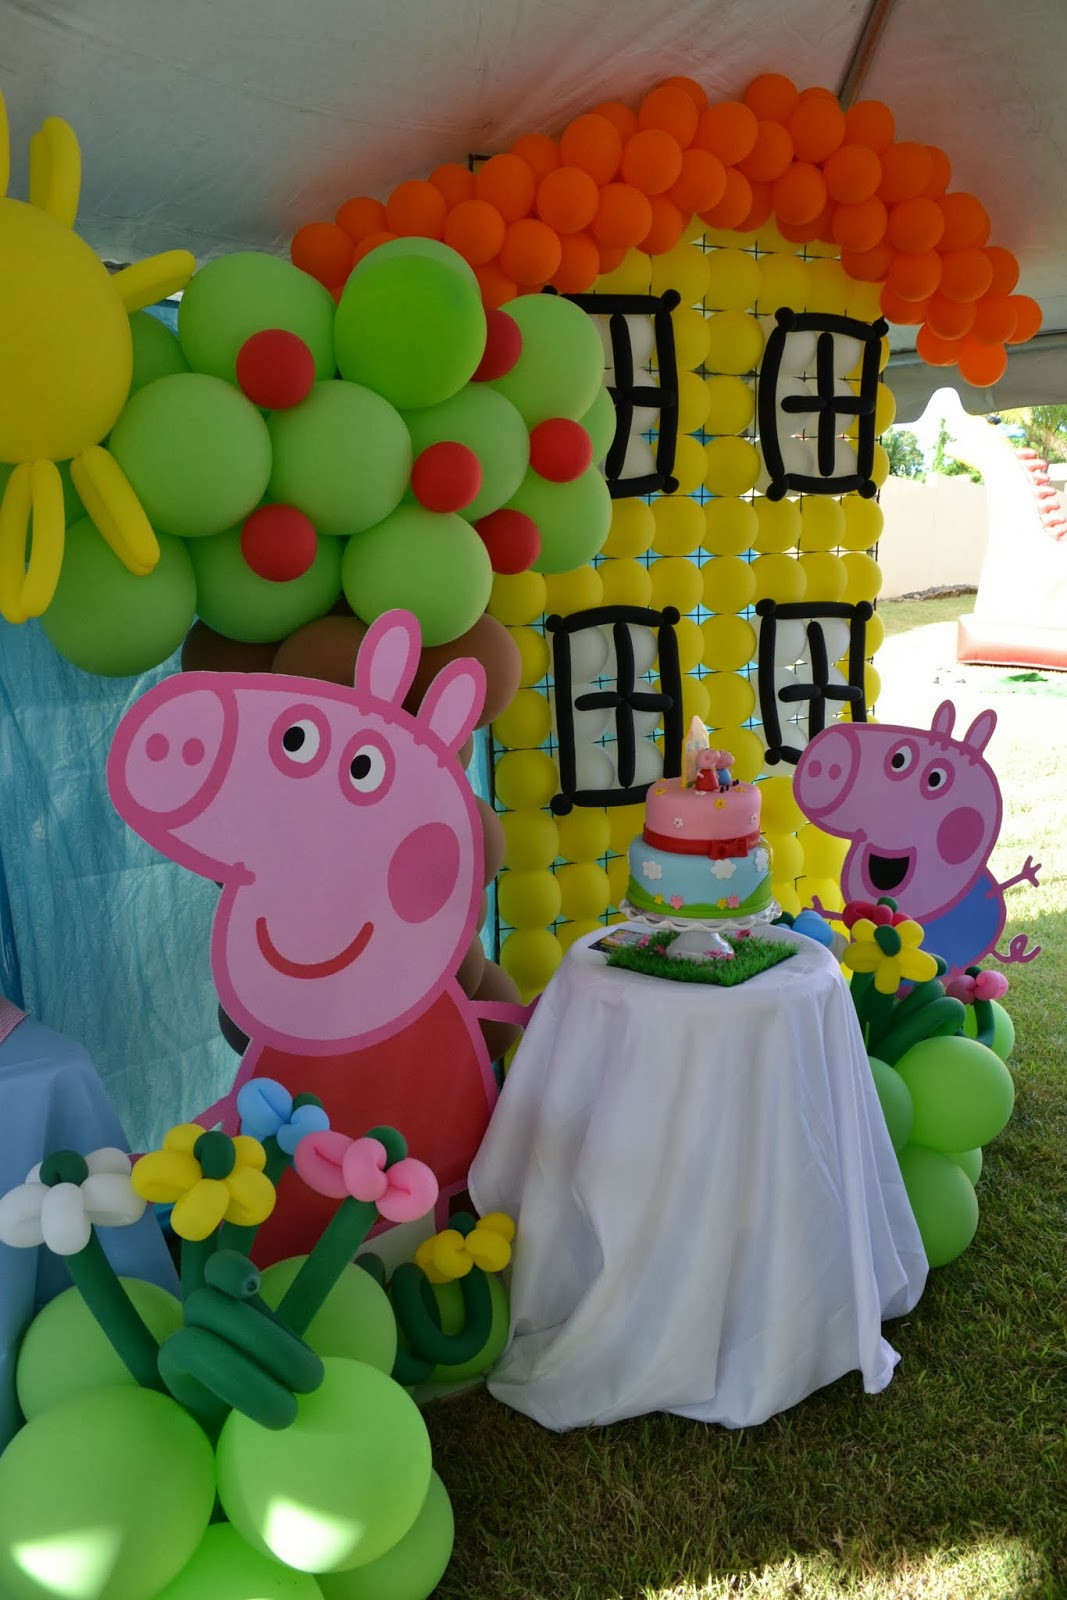 Peppa Pig Birthday Party Decorations
 Partylicious Events PR Peppa Pig Party